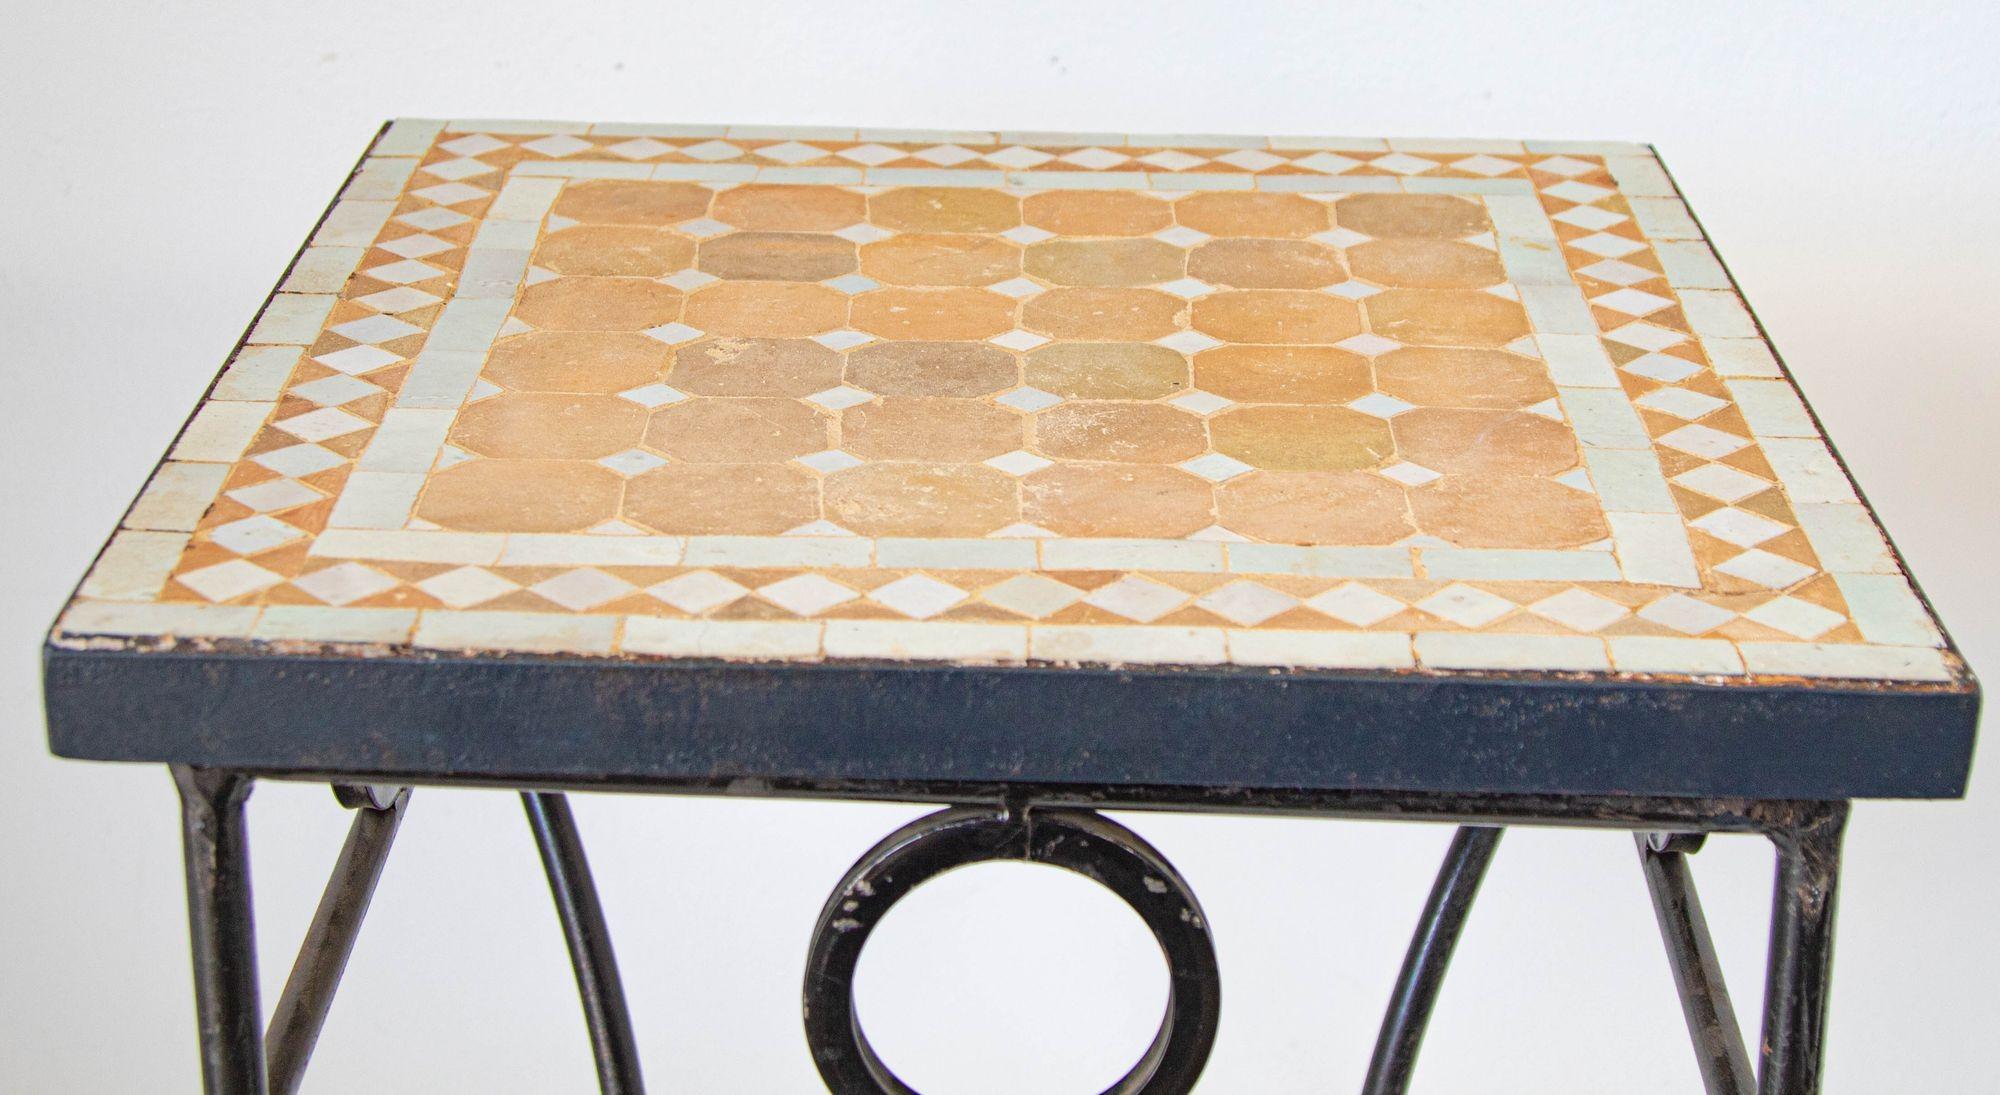 Vintage Moroccan Mosaic Outdoor Tile Table In Good Condition For Sale In North Hollywood, CA